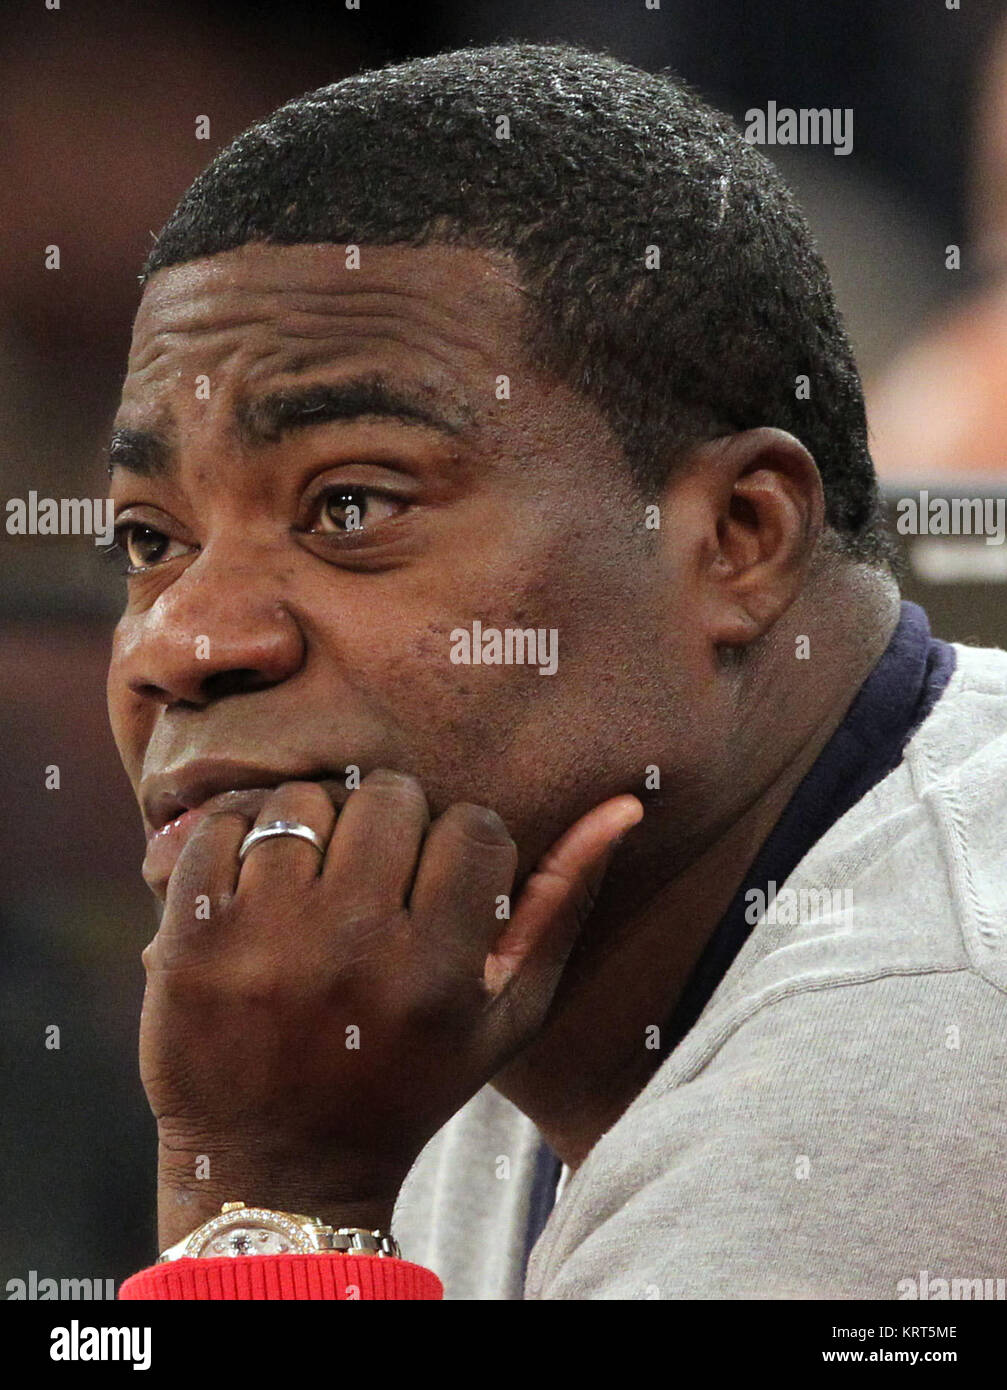 NEW YORK, NY - NOVEMBER 08: (Embargoed till November 10, 2015) Magic Johnson, Tracy Morgan with wife Megan Wollover sit with Michael K. Williams and  Director Spike Lee at the New York Knicks vs Los Angeles Lakers game at Madison Square Garden on November 8, 2015 in New York City.   People:  Tracy Morgan Stock Photo